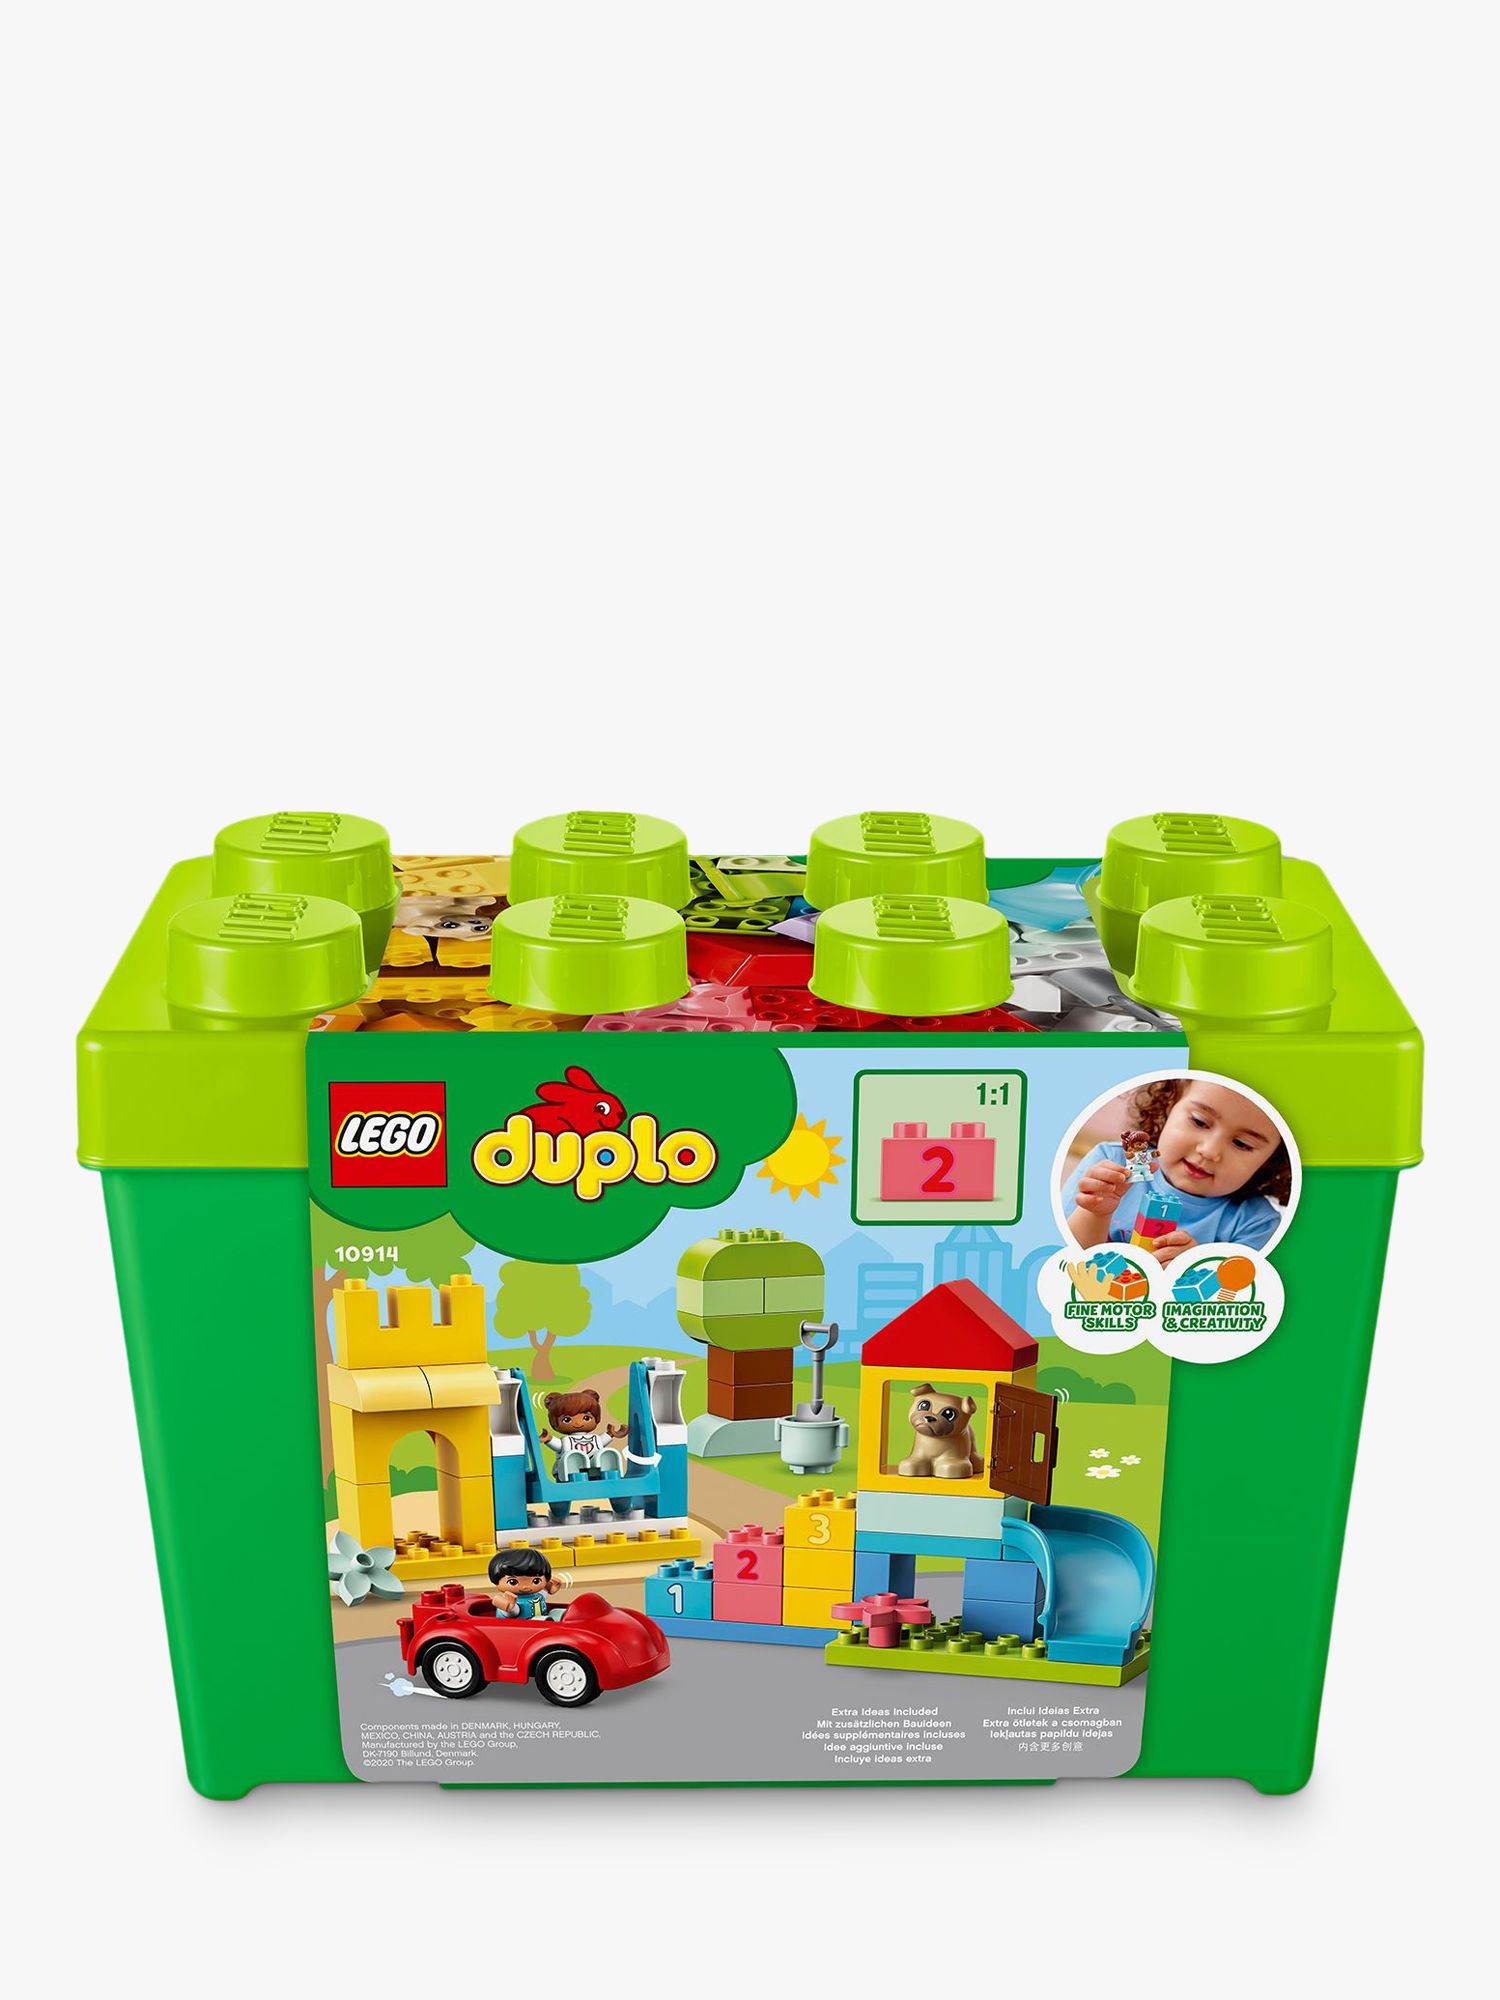 Lego Duplo 10914 Classic Deluxe Brick Box At John Lewis And Partners